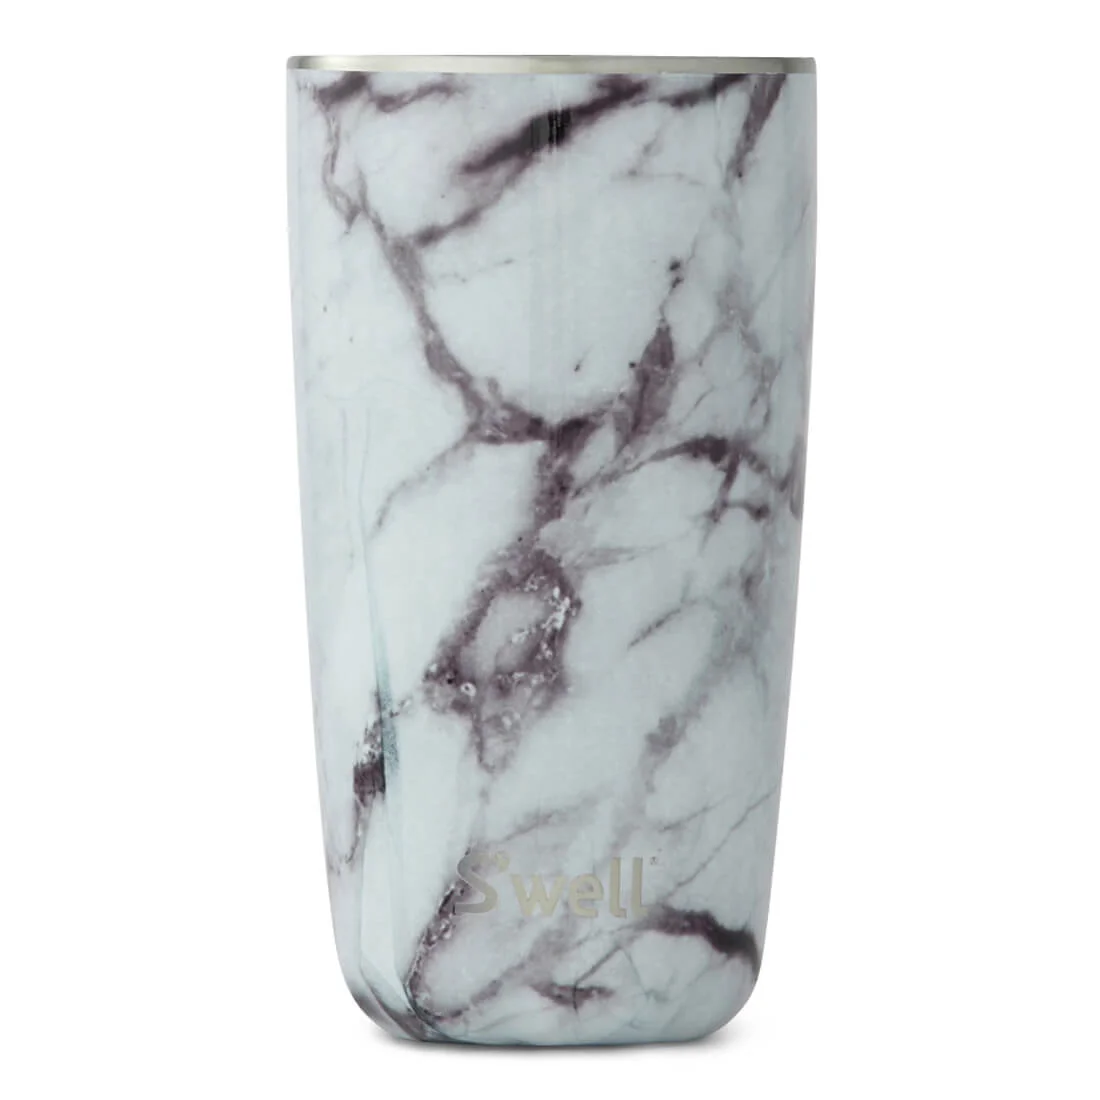 S'well The White Marble Tumbler 530ml Image 1